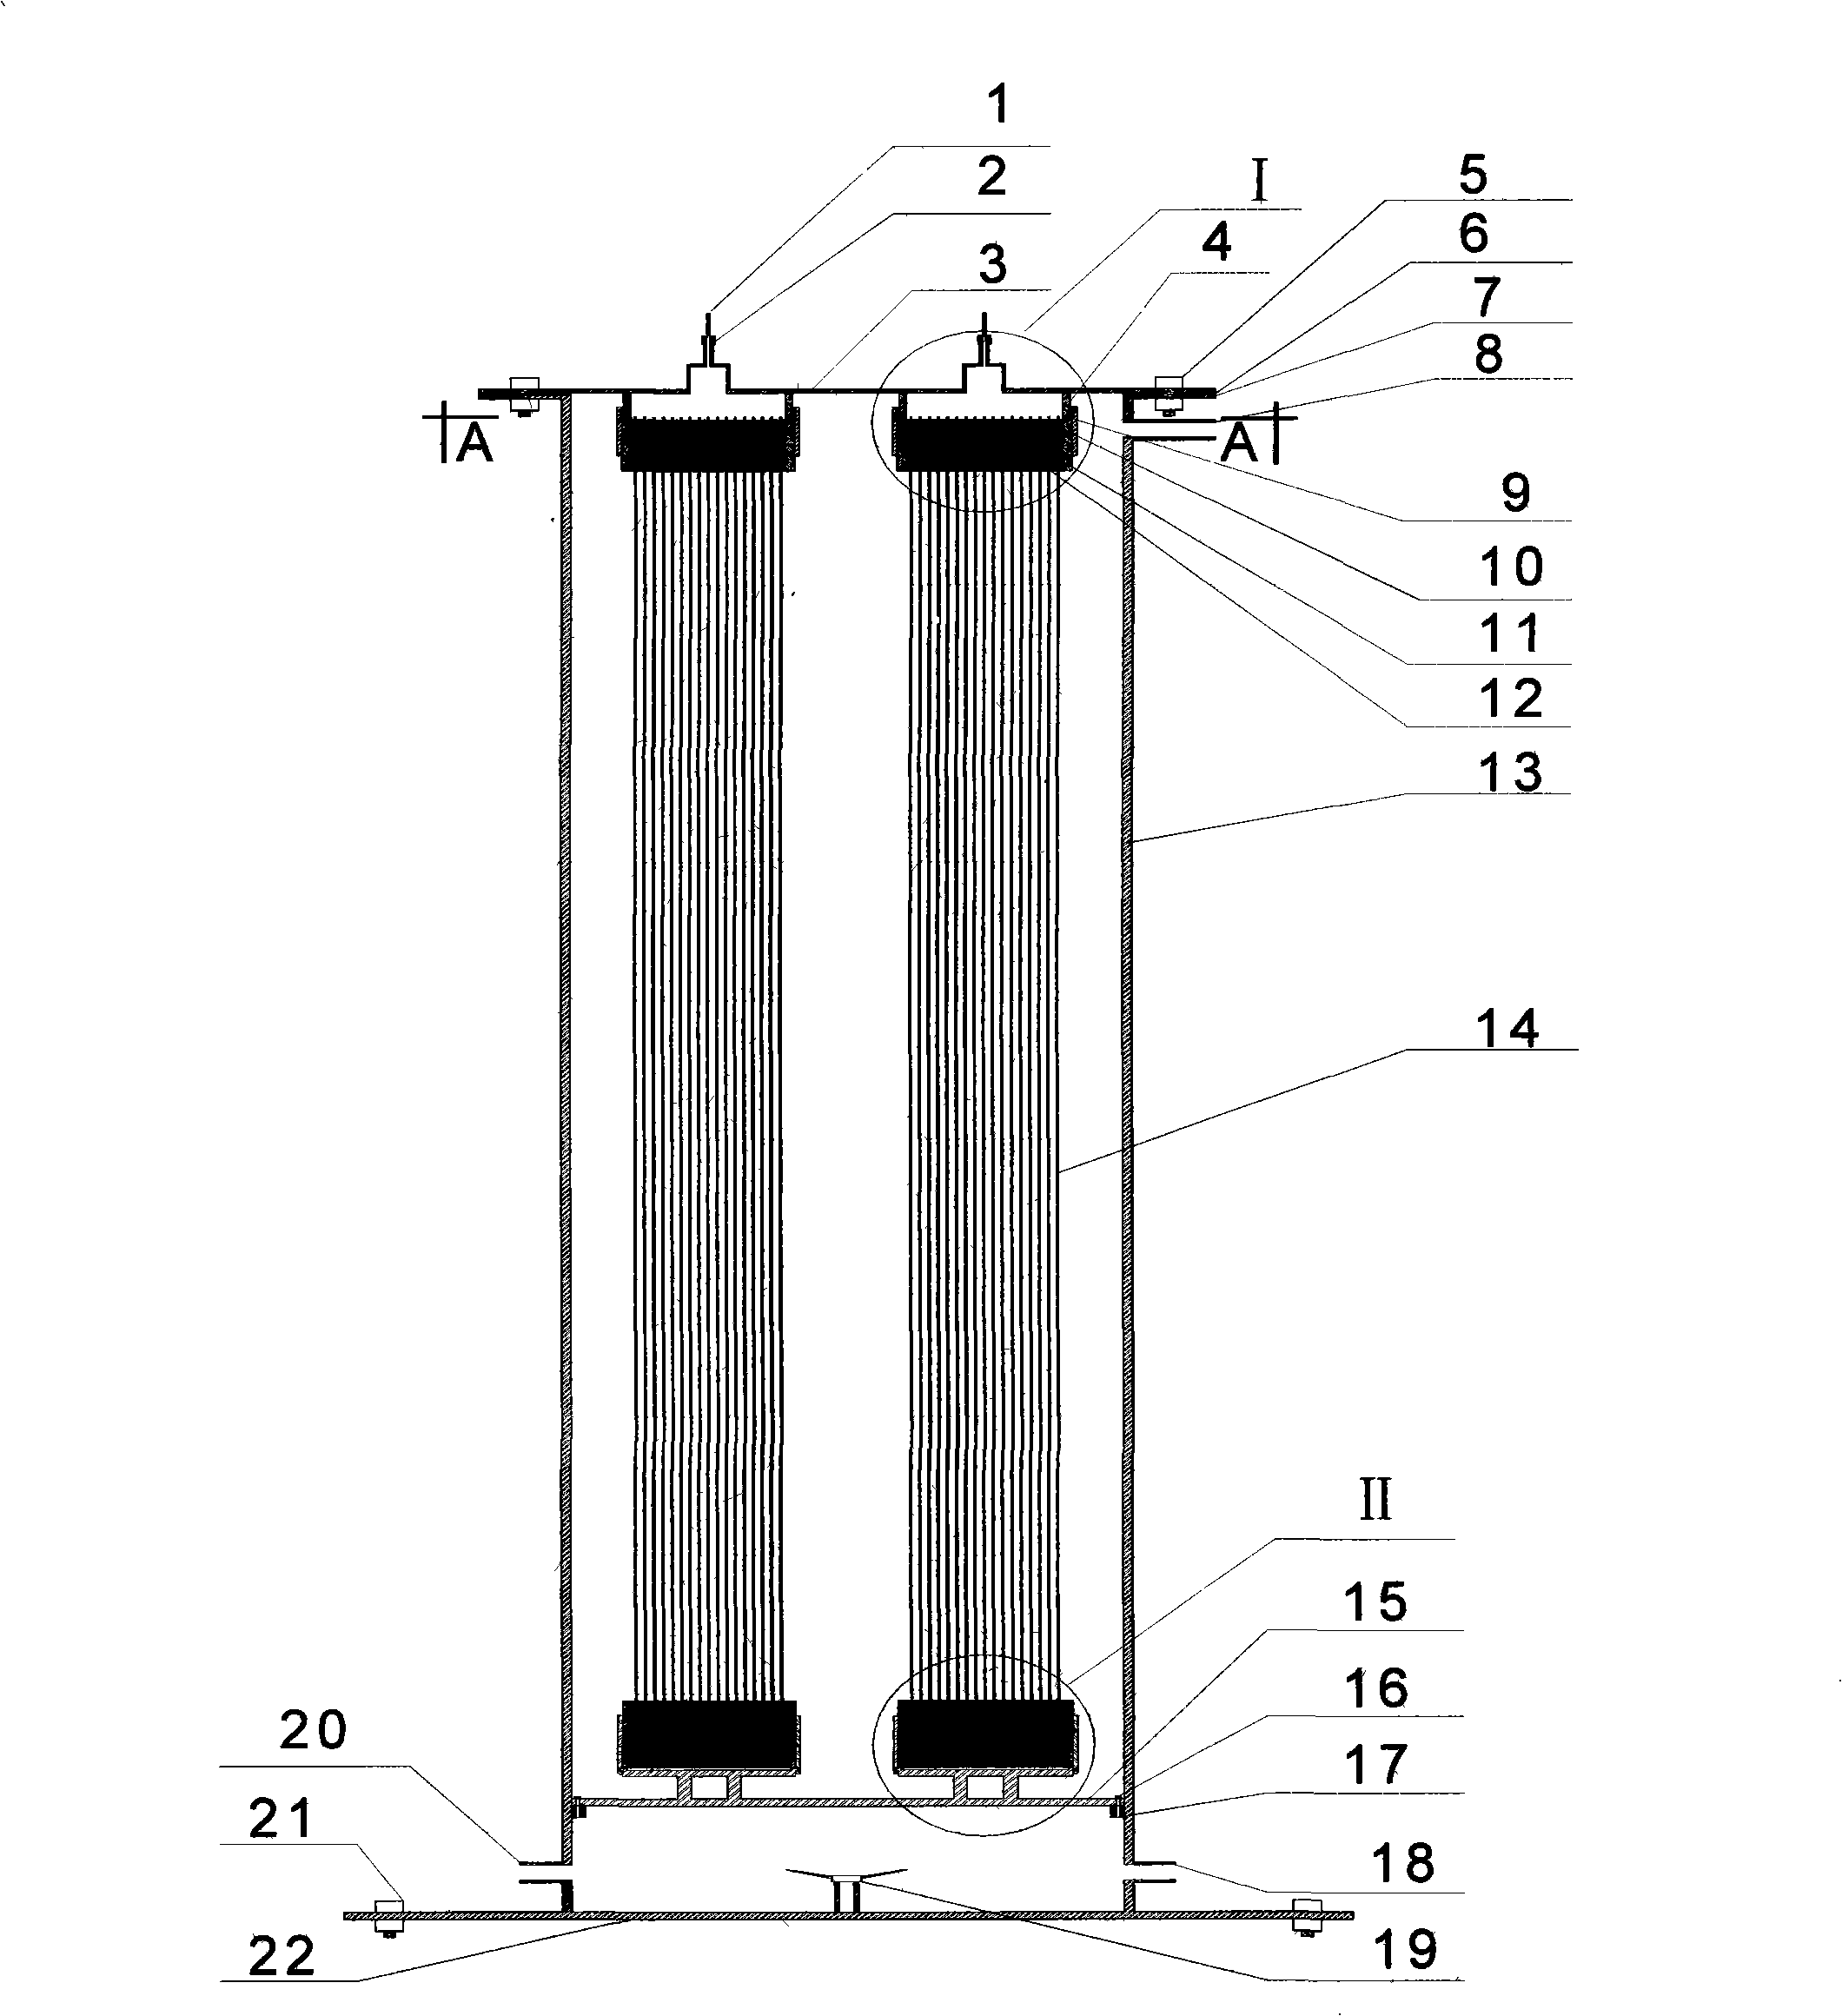 Apparatus for processing oxidative pollutant in drinking water